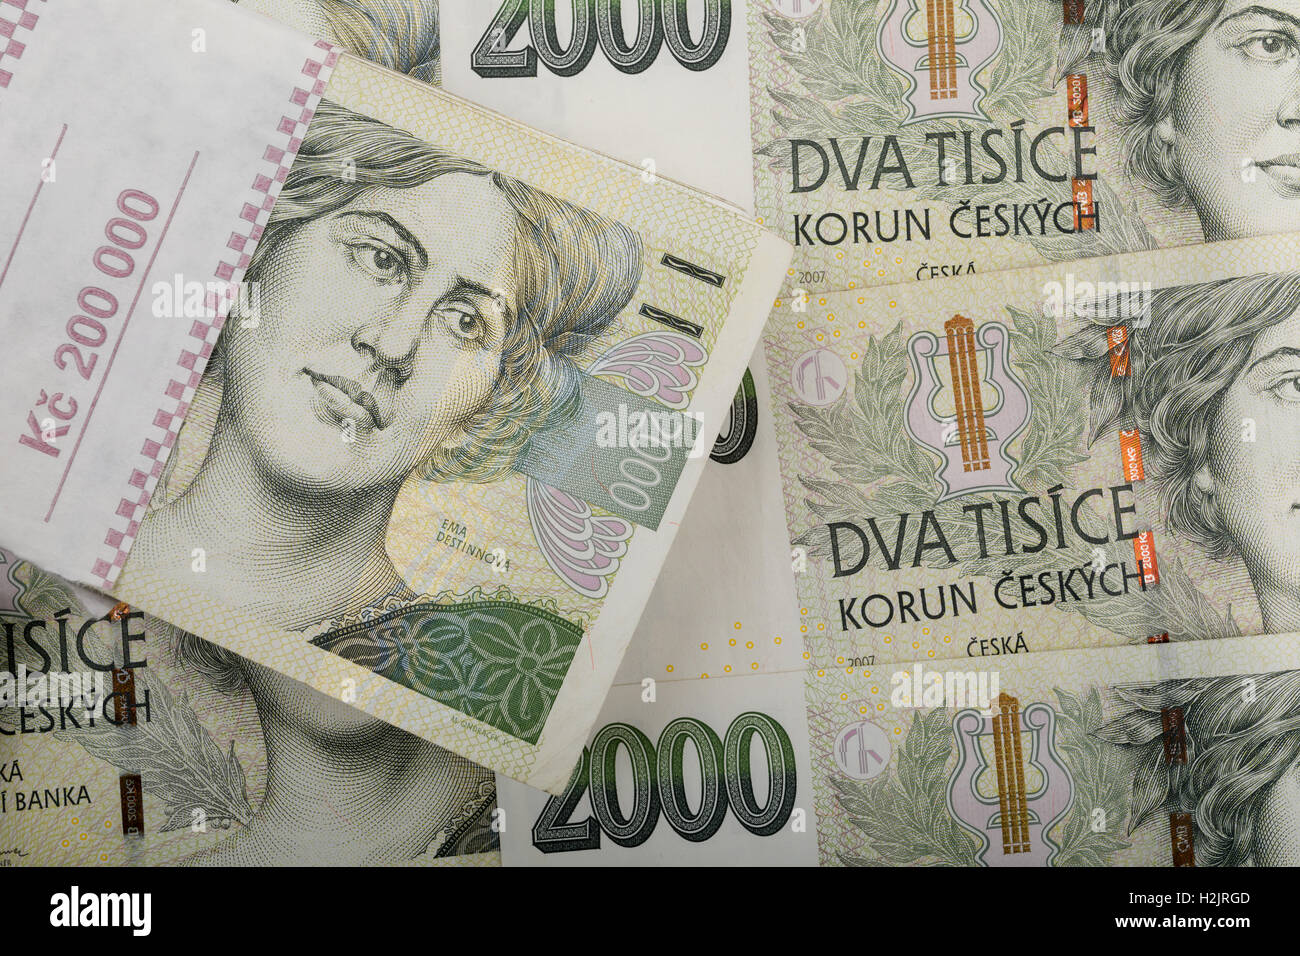 czech banknotes nominal value two thousand crowns as background Stock Photo